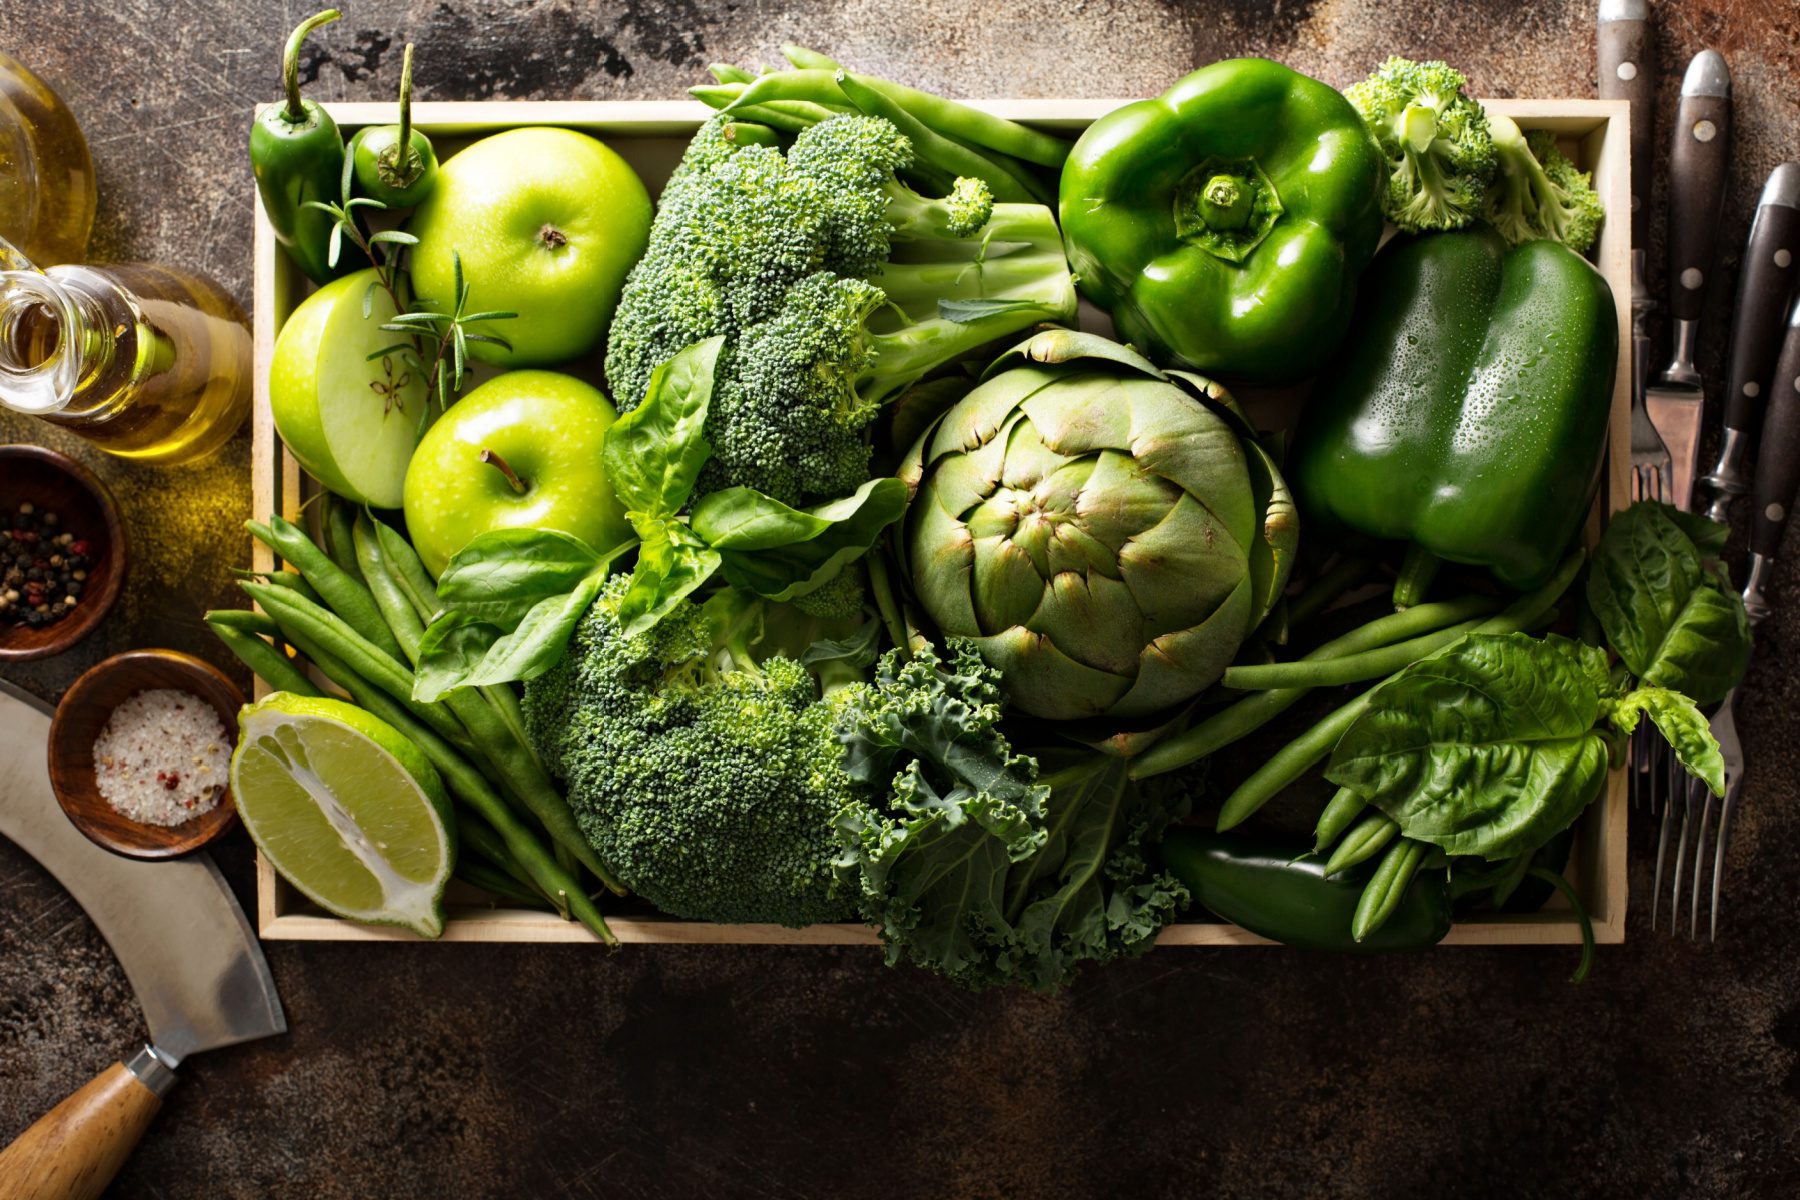 Why You Need To Get Your Greens In Every Day